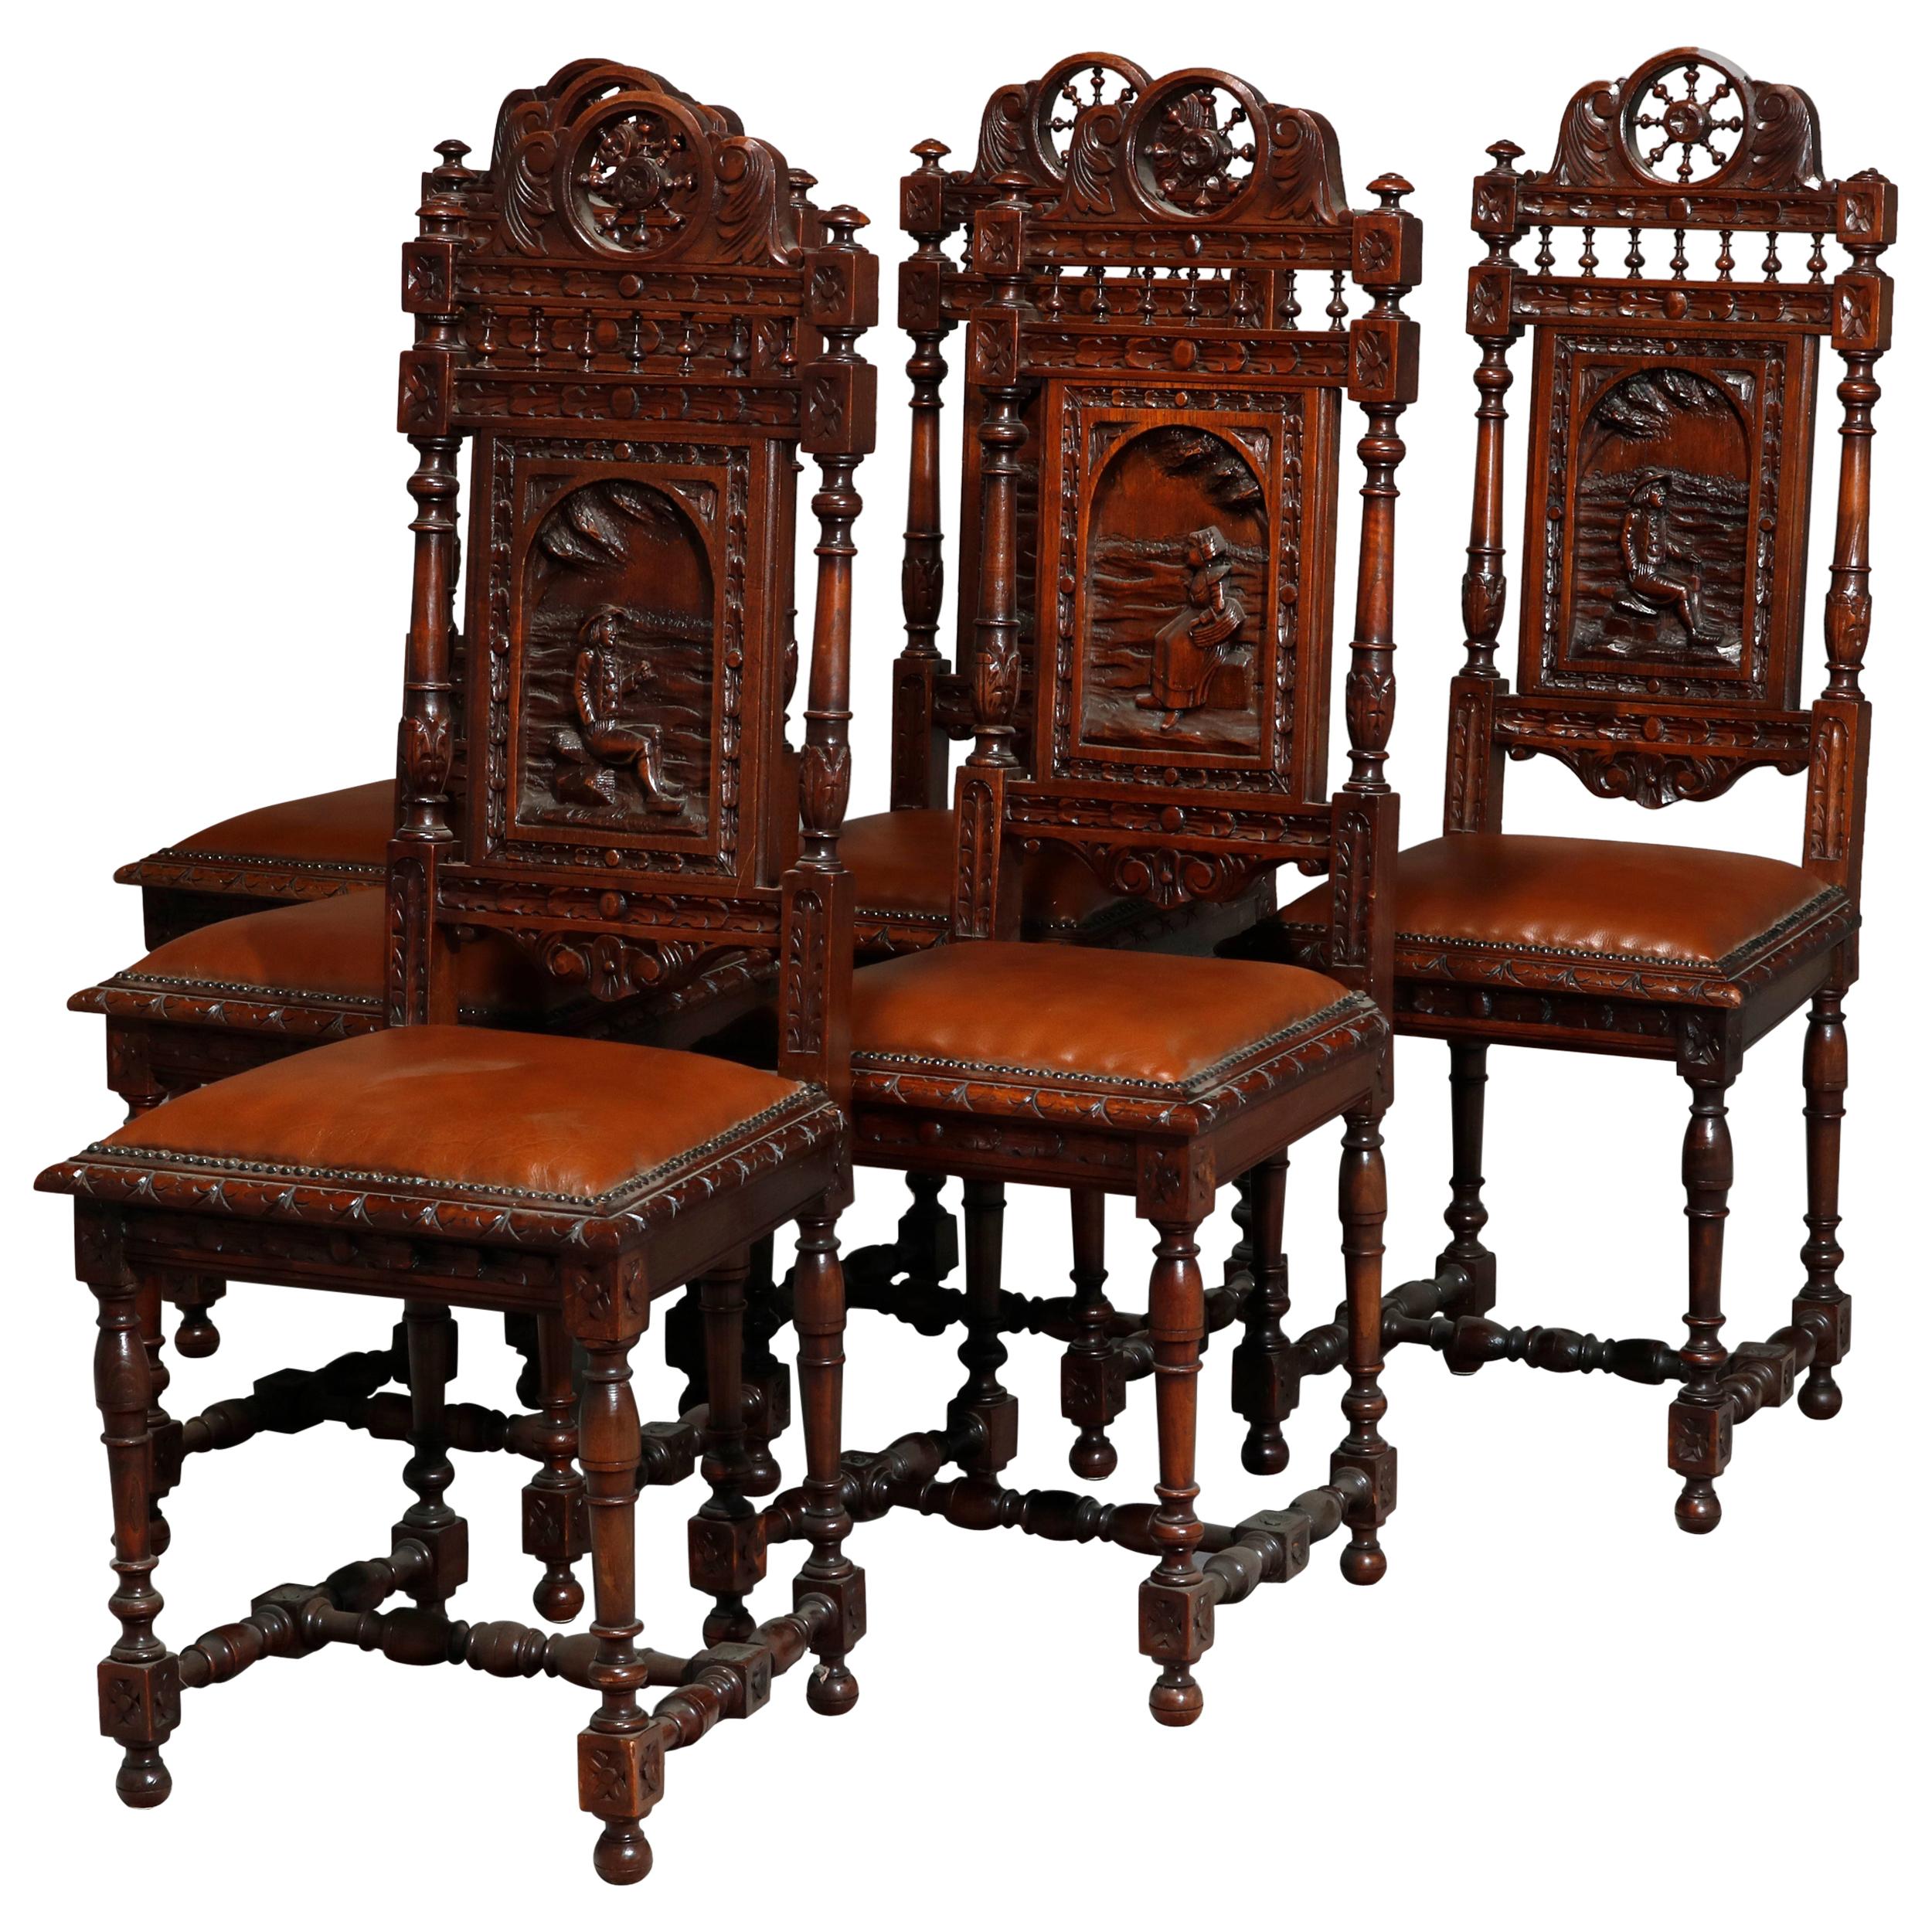 Antique Set of 6Continental Deeply Carved Genre Scenes Oak Dining Chairs, c 1890